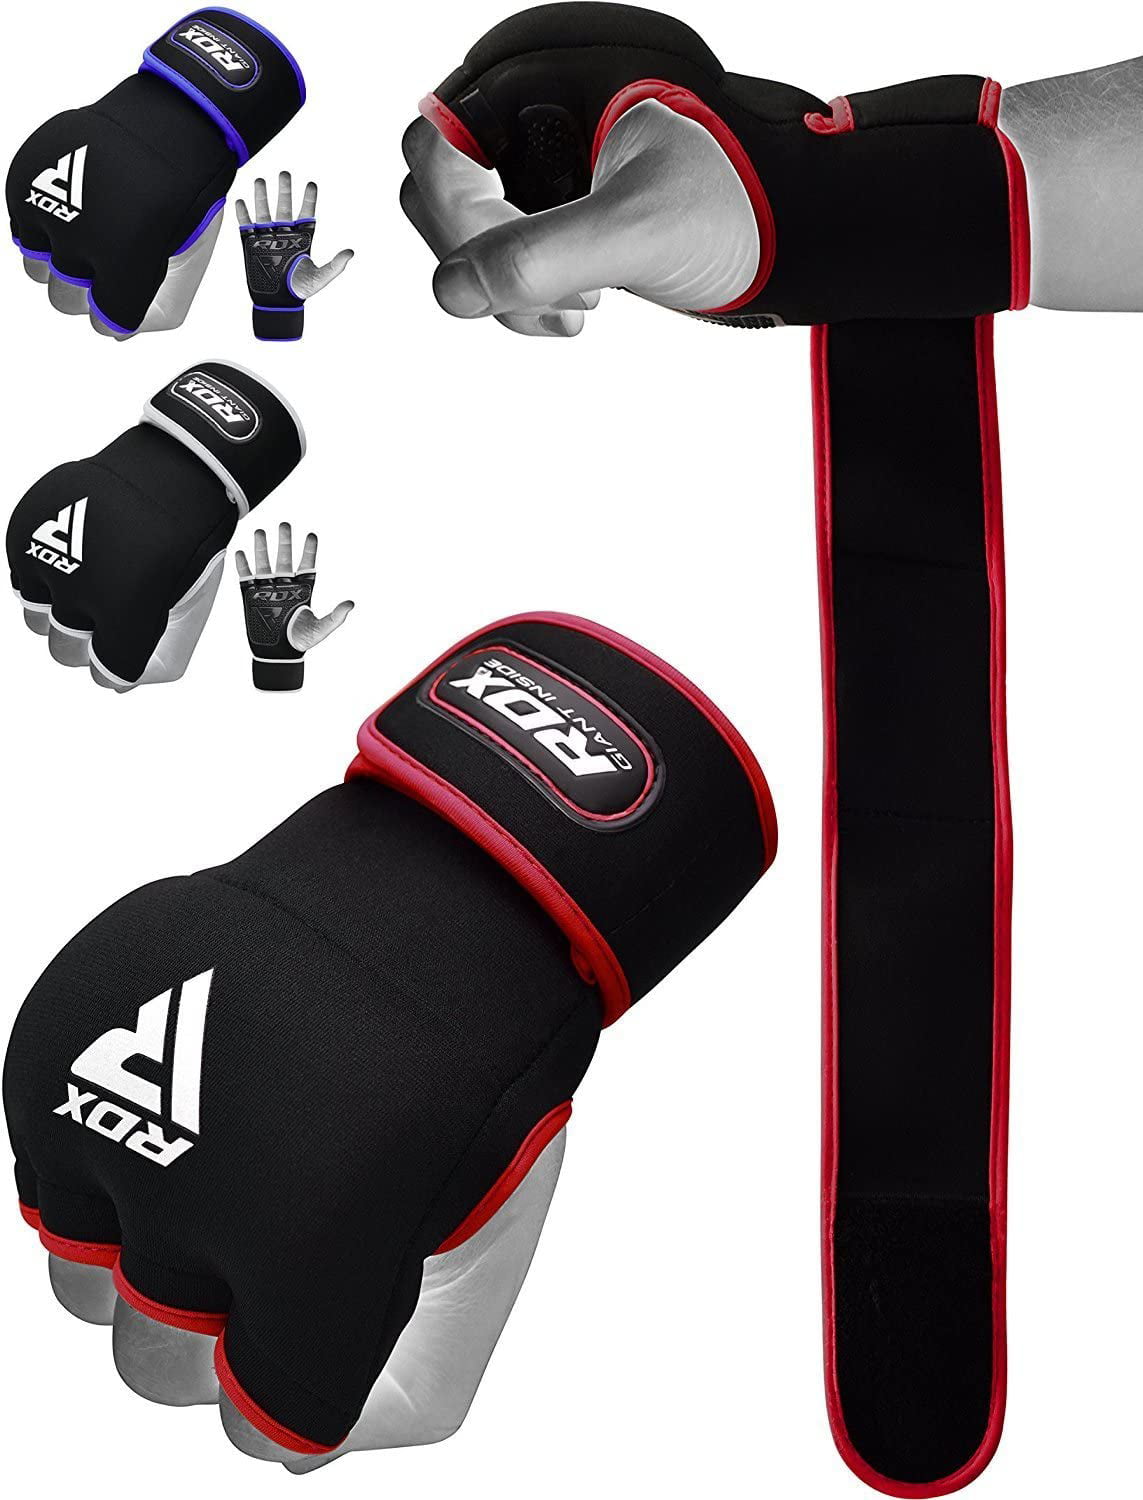 Ard Boxing Fist Inner Gloves Hand Wraps Muay Thai Boxing Martial Arts BLACK S-XL 